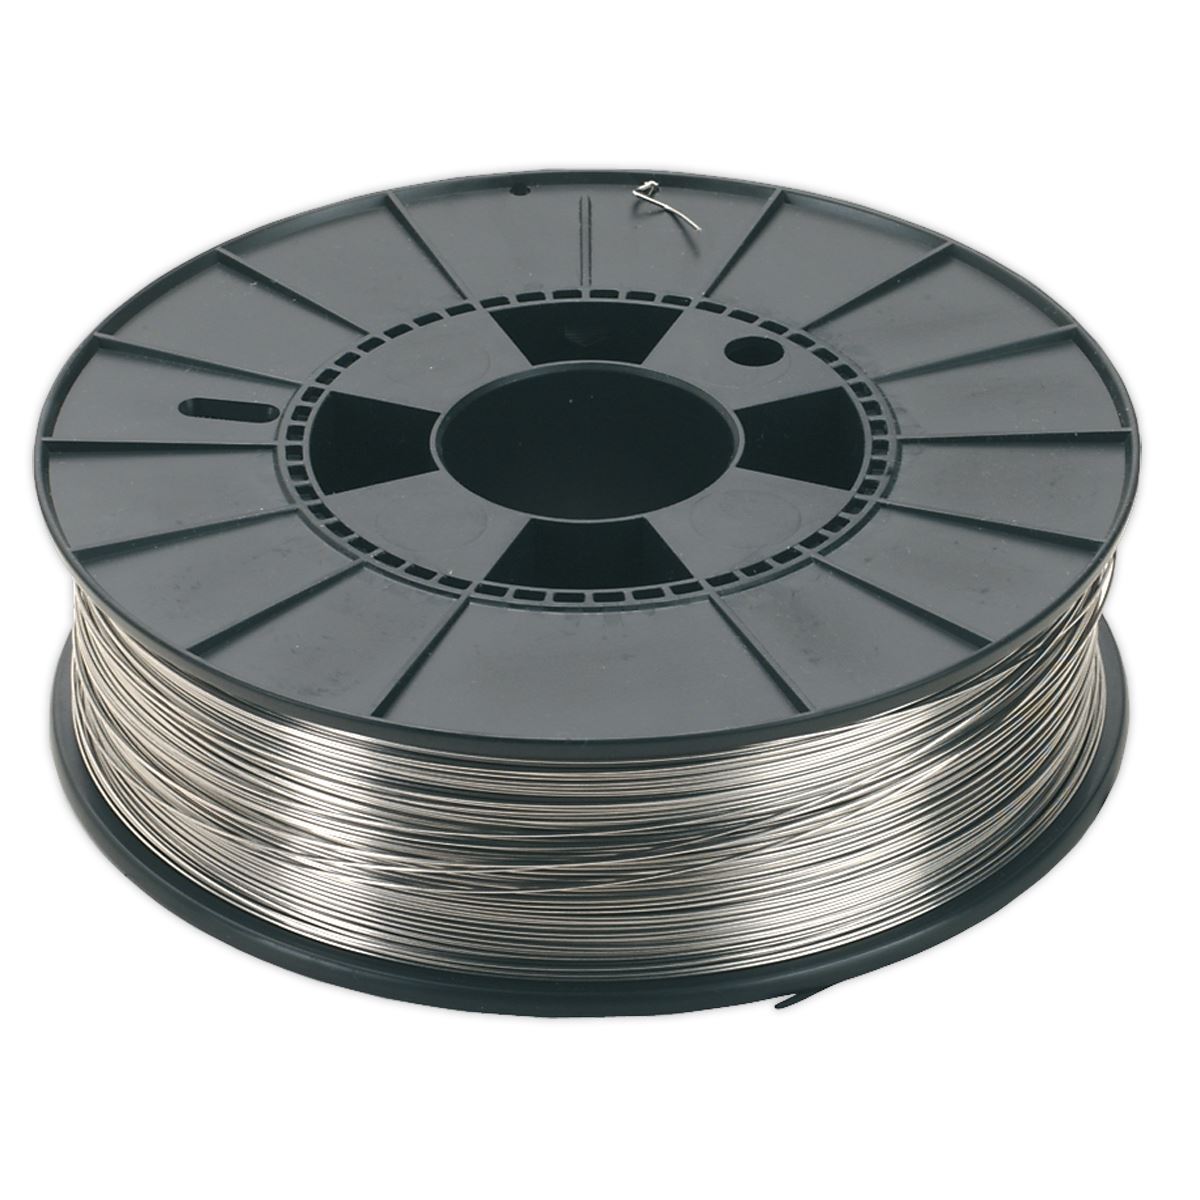 Sealey Stainless Steel MIG Wire 5kg 0.8mm 308(S)93 Grade